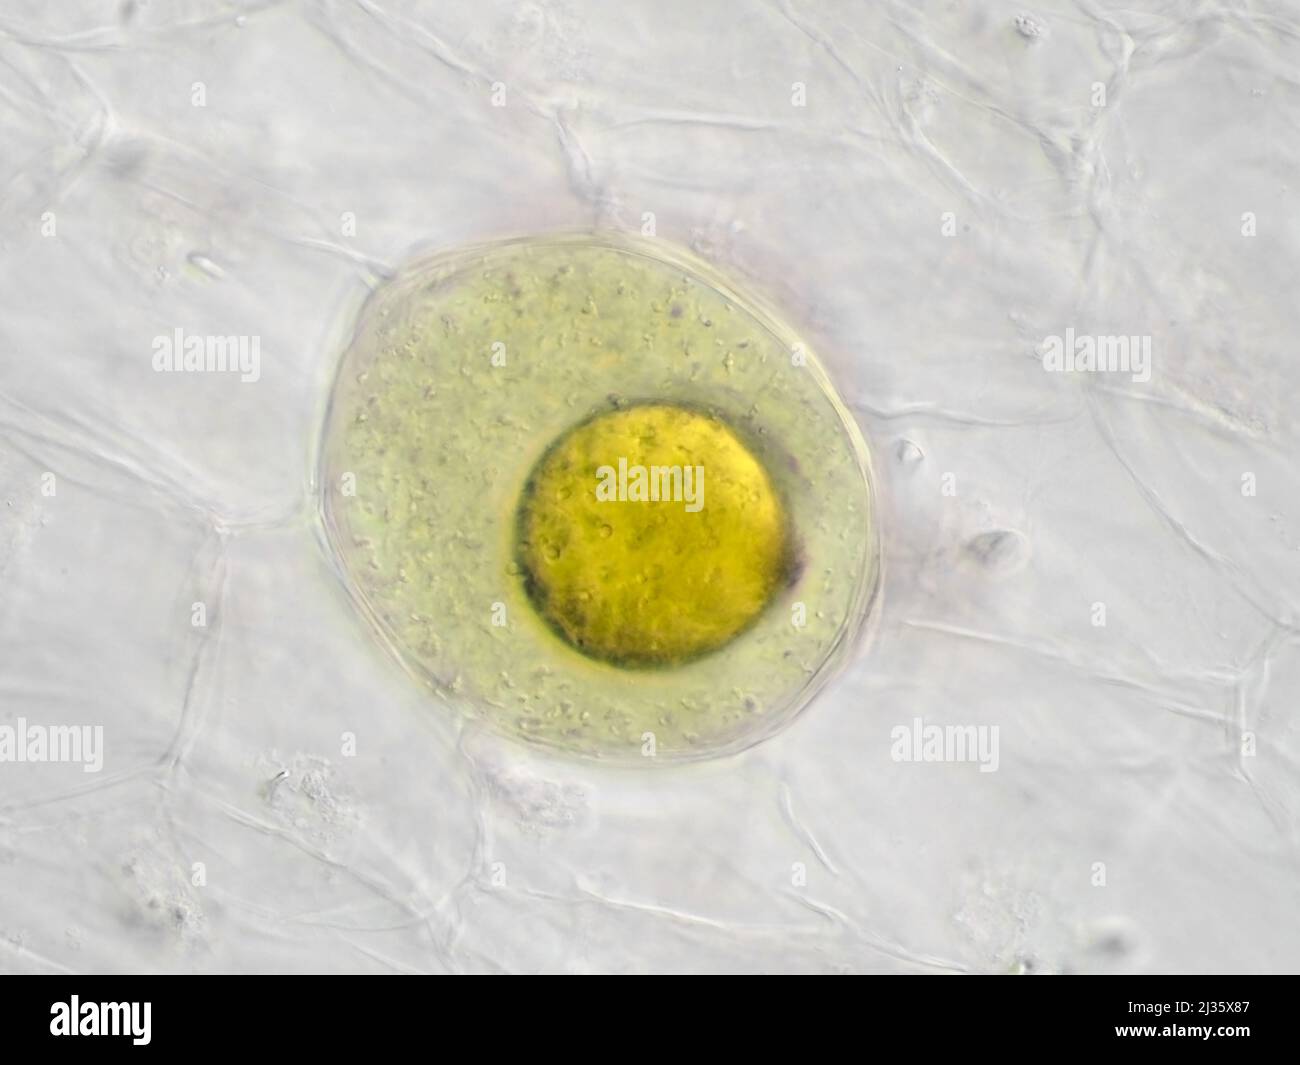 Pickled sushi ginger under the microscope, showing a secretory cell with an oil globule Stock Photo